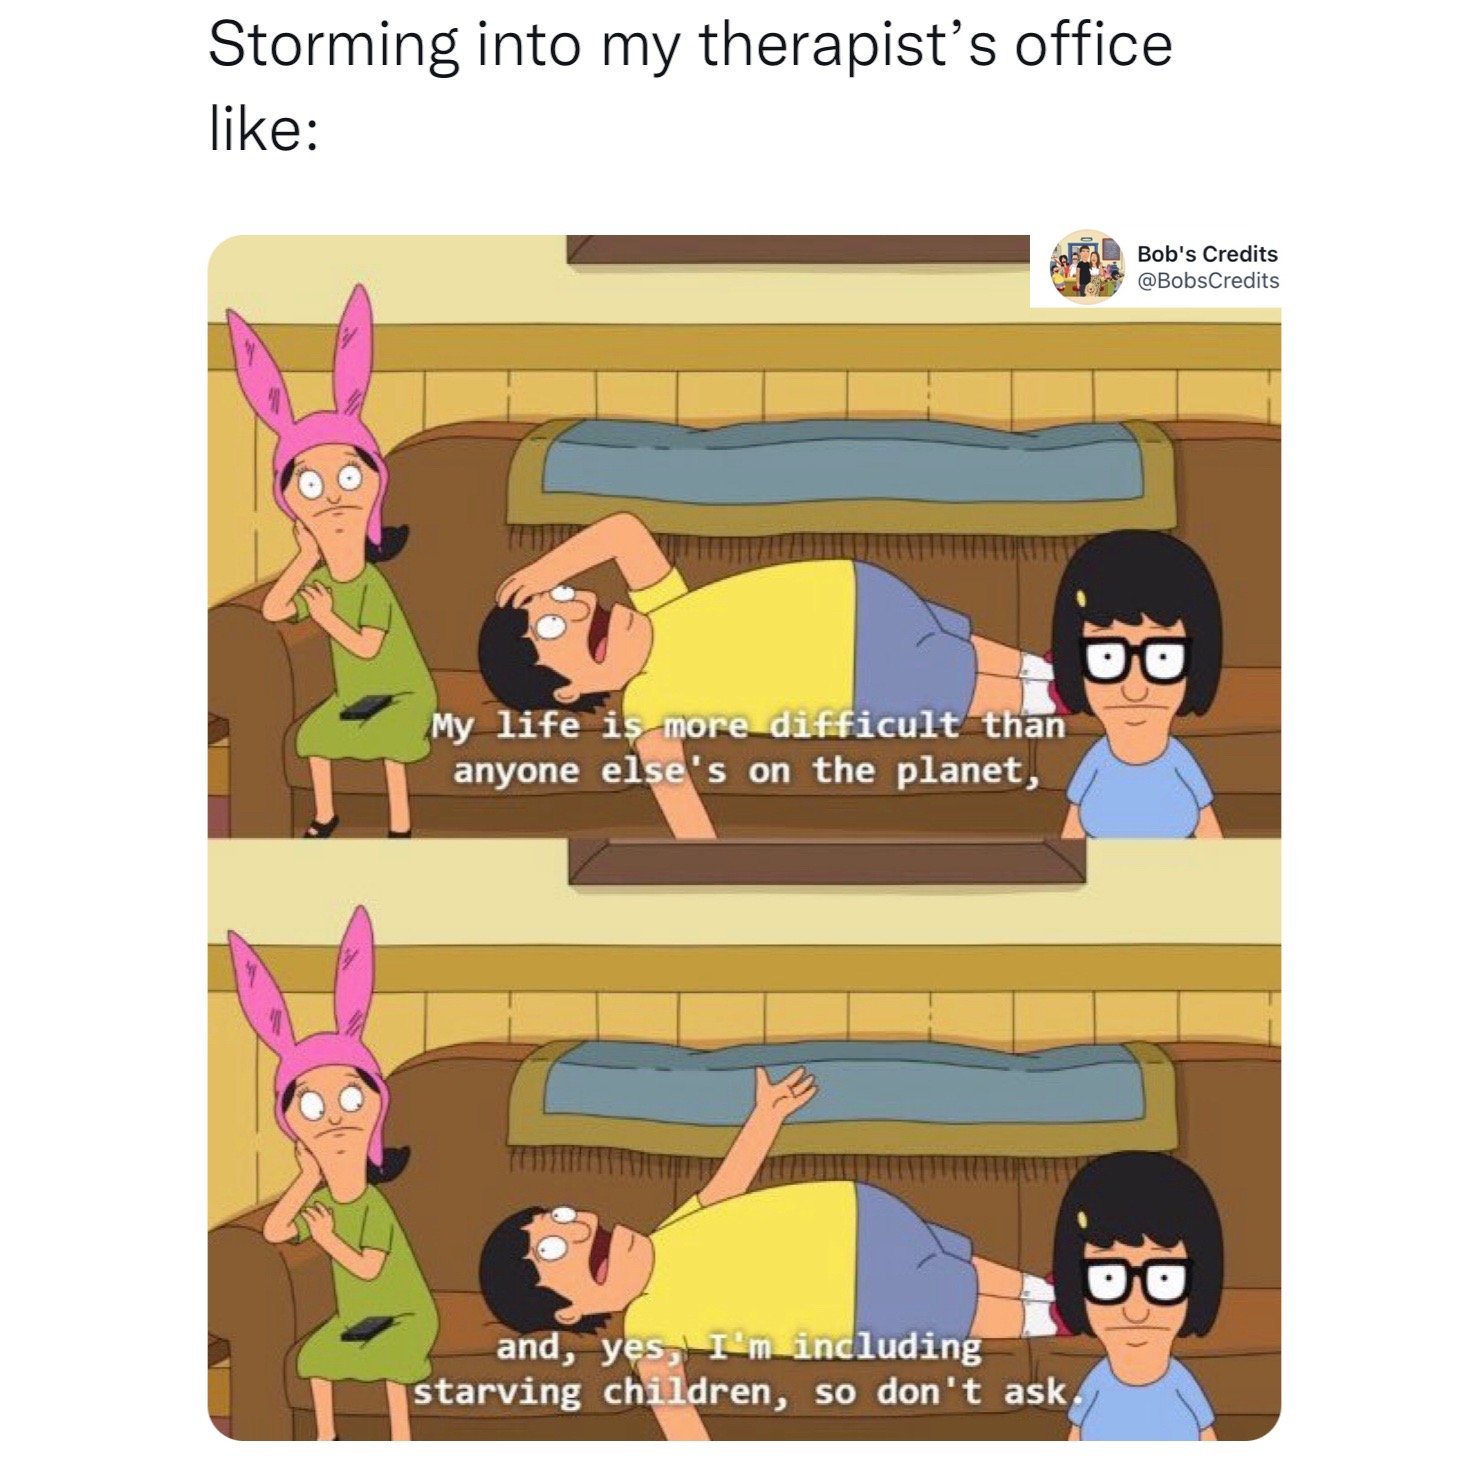 Best-Bobs-Burgers-Memes-Funny-Memes-therapists-office-life-difficult.JPG